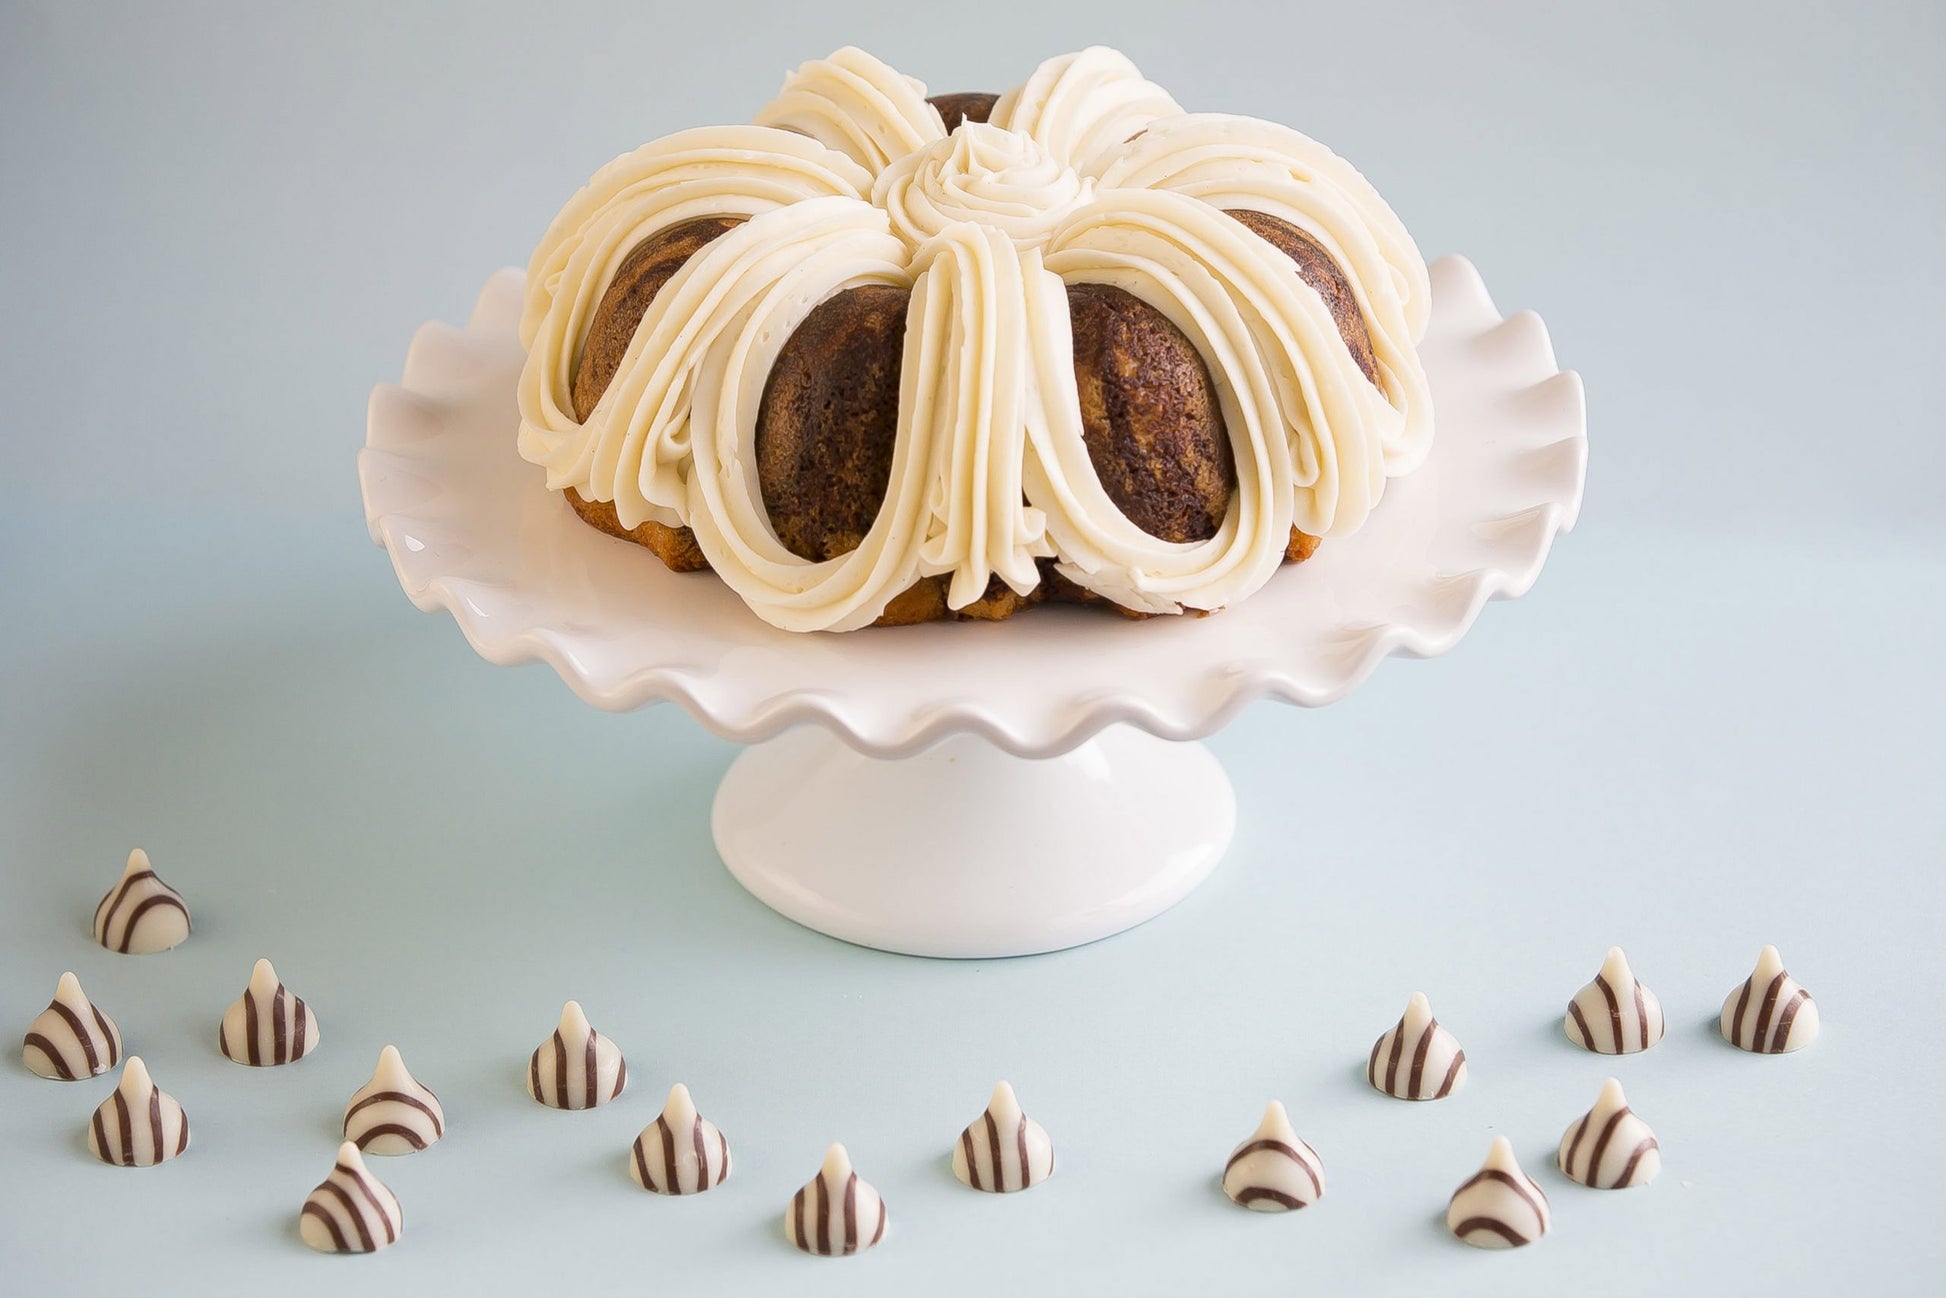 Treat yourself to rich Gluten-free Double Chocolate Bundt cake with fudgy mini morsels perfectly paired with our signature buttercream frosting and finished with a chocolate chip on top. A perfect blend of flavors and textures, it will satisfy your sweet cravings and it's Gluten-free.